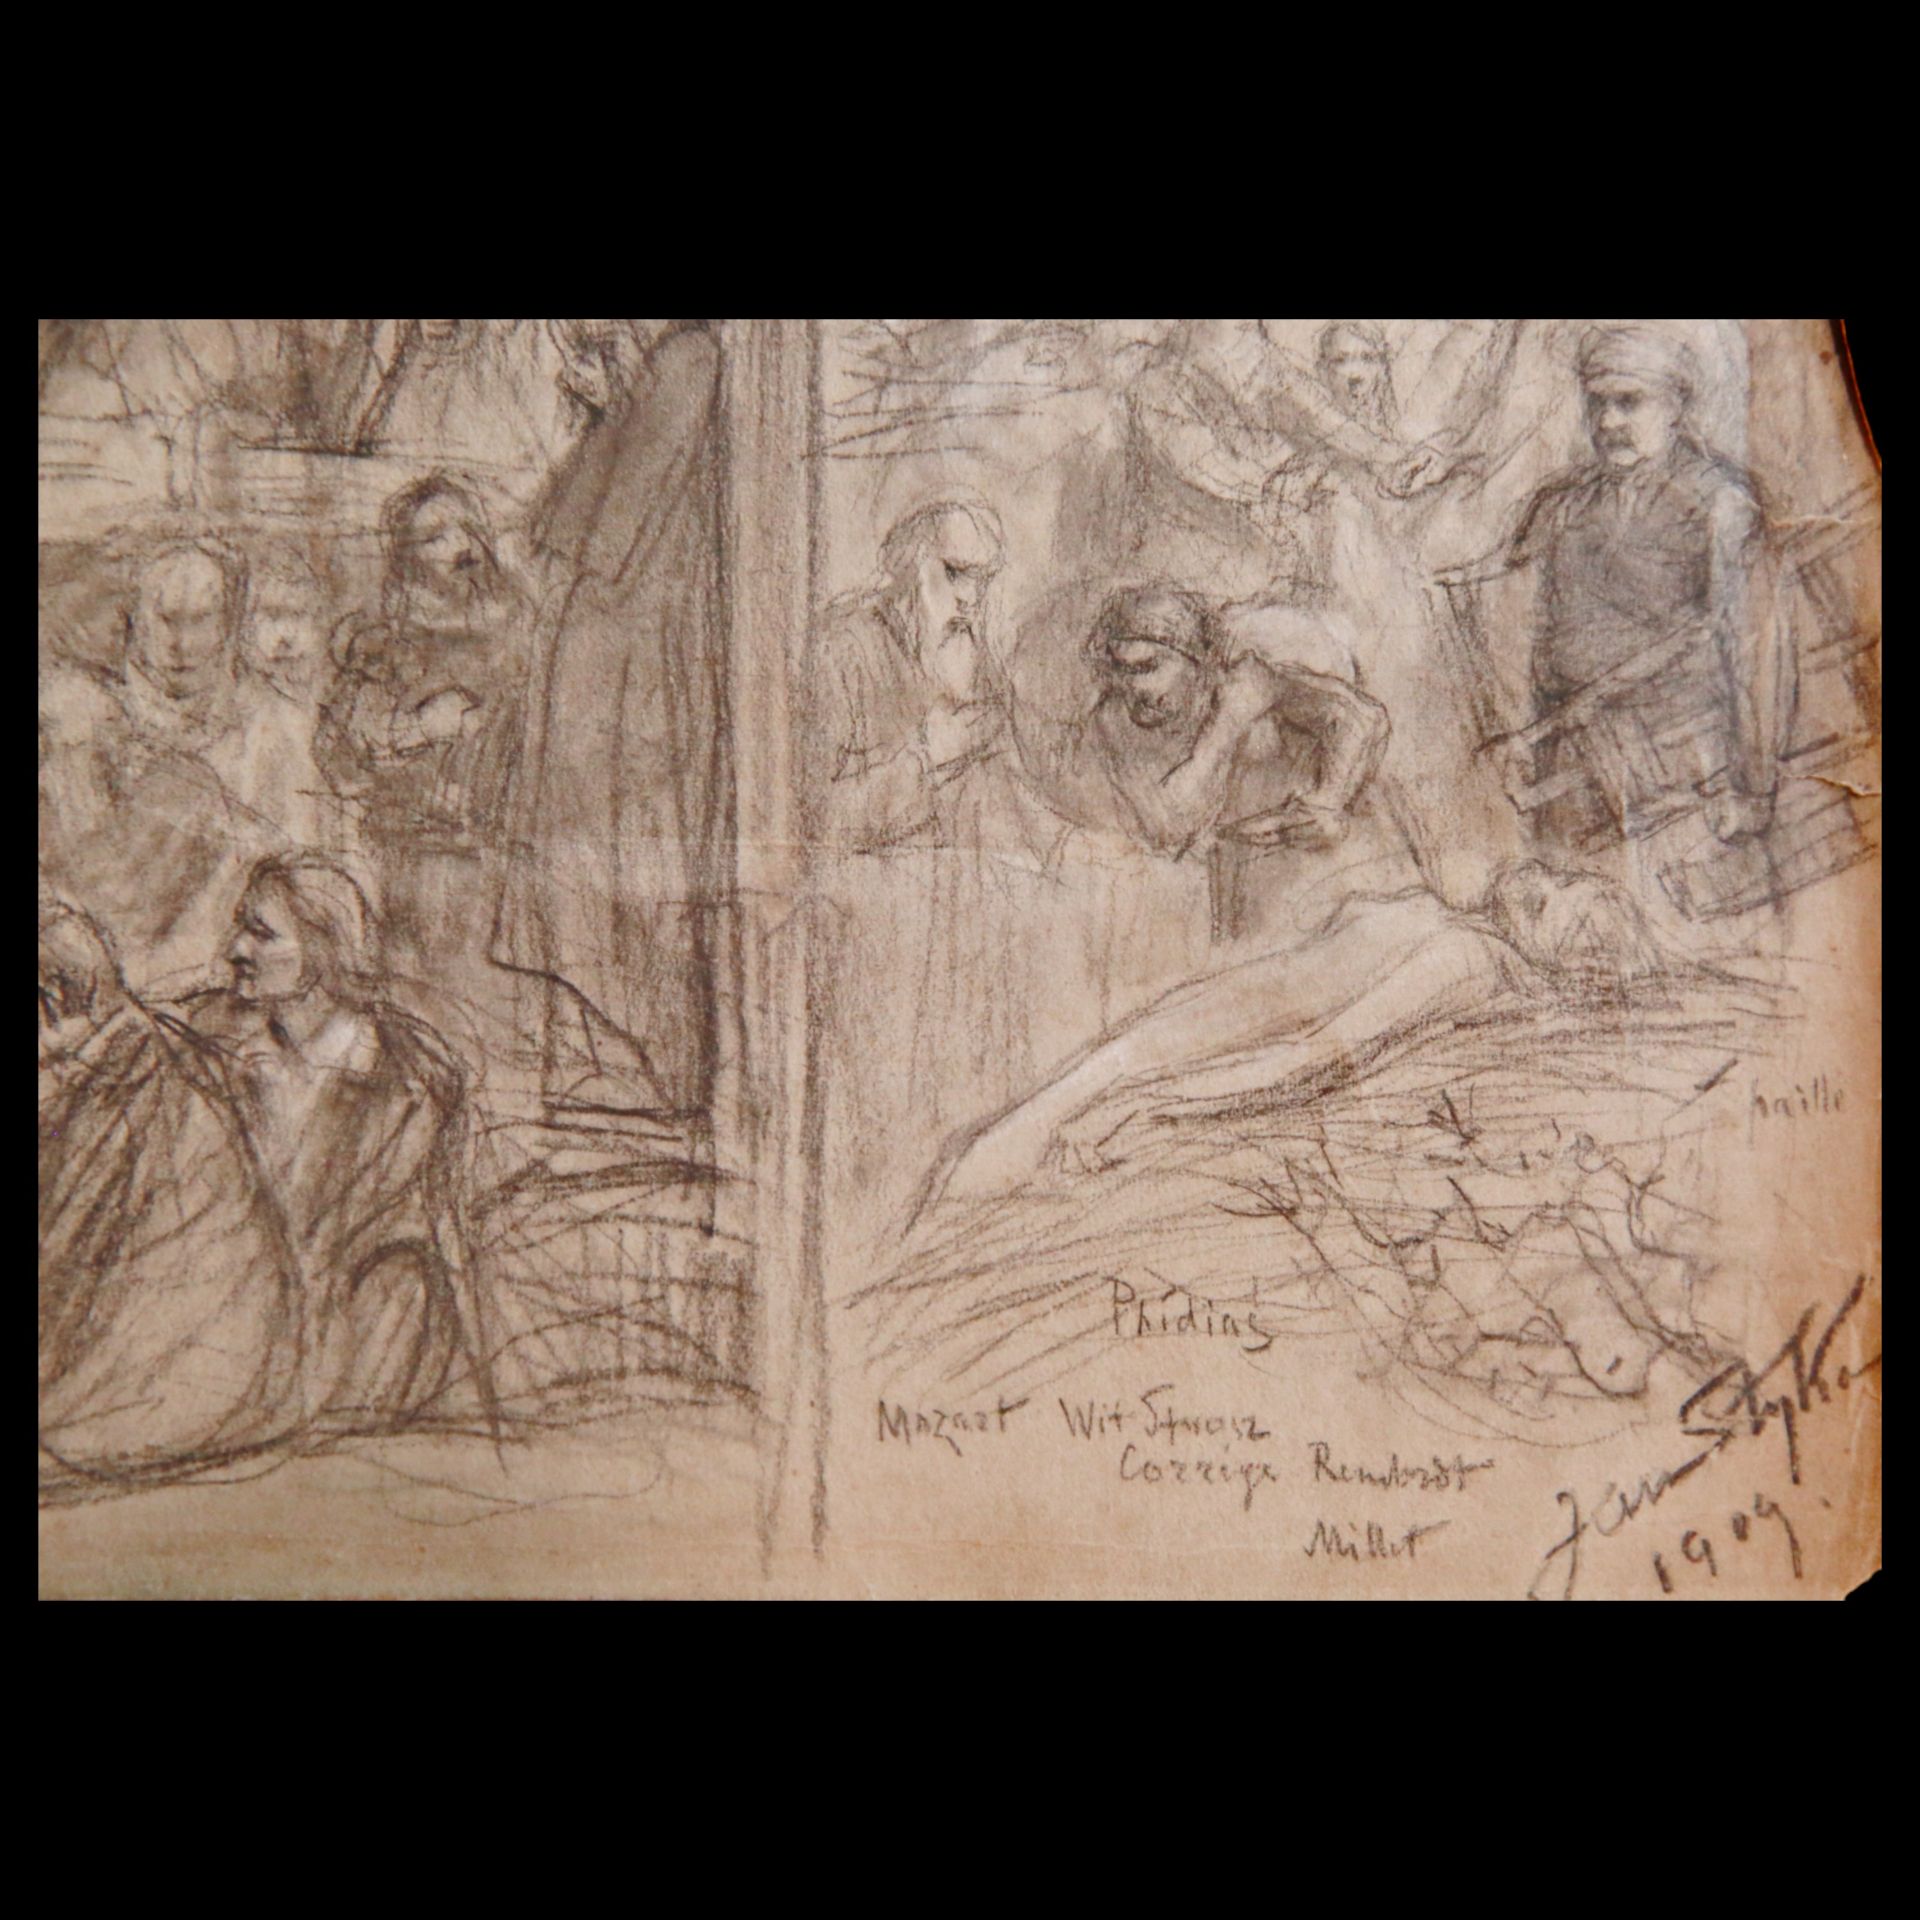 Jan STYKA (1858-1925) drawing on a biblical theme, Pencil on paper, author signature,1909. - Image 3 of 7